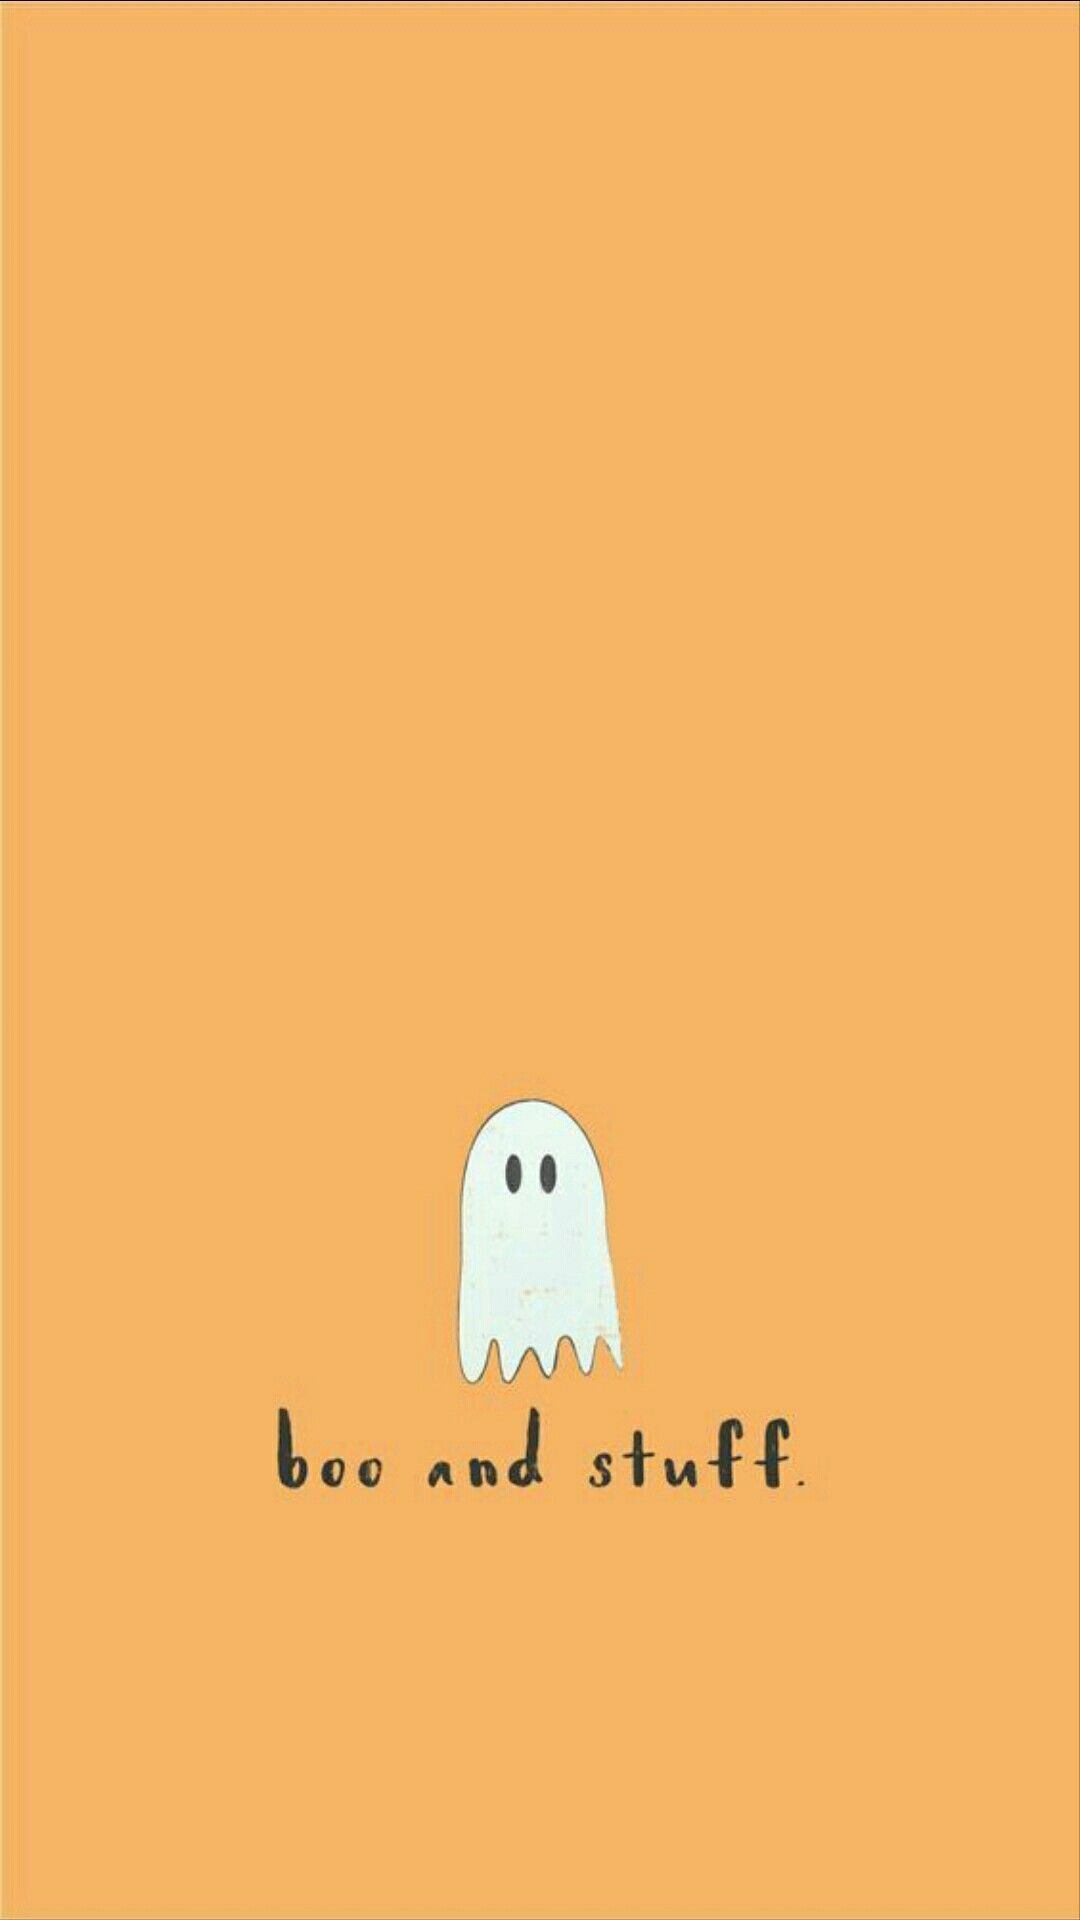 A cartoon ghost on an orange background with the words 